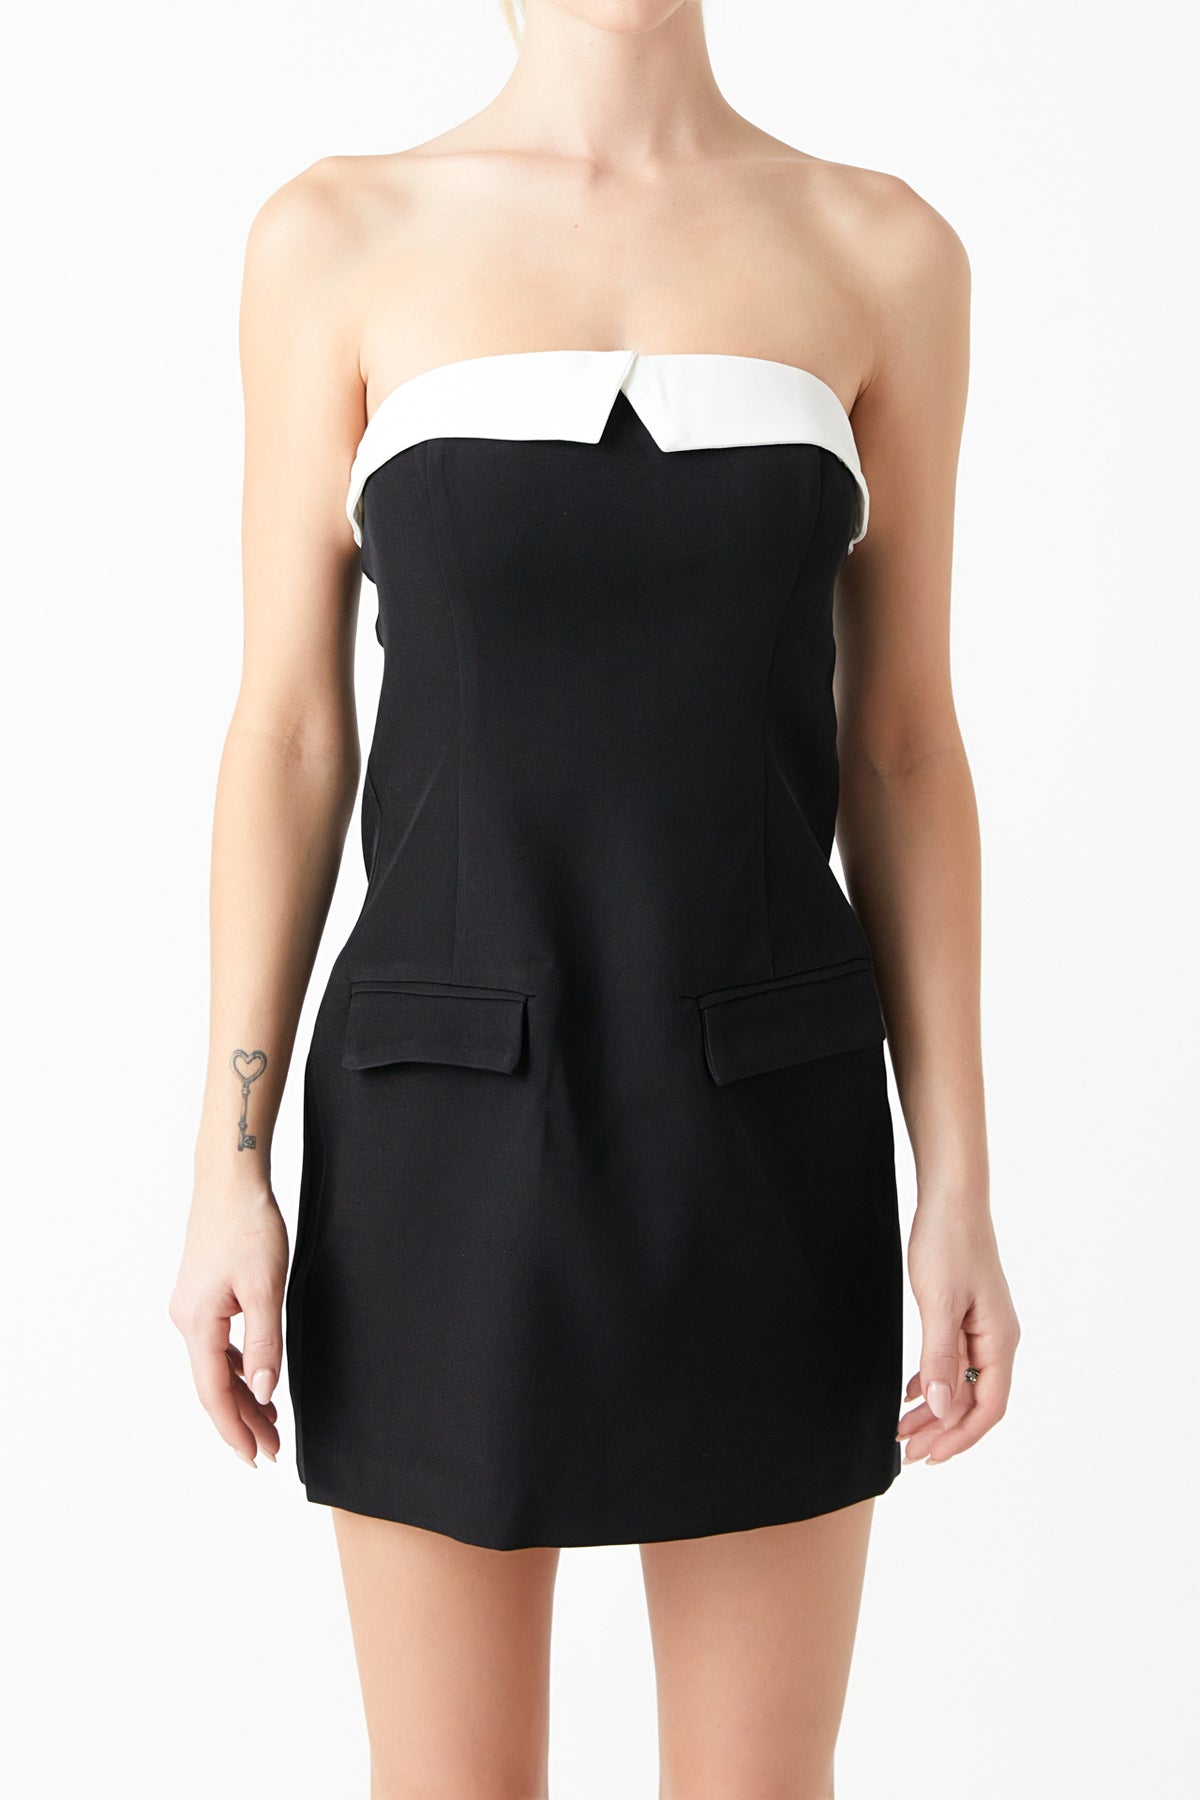 GREY LAB - Strapless Contrast Mini Dress - DRESSES available at Objectrare